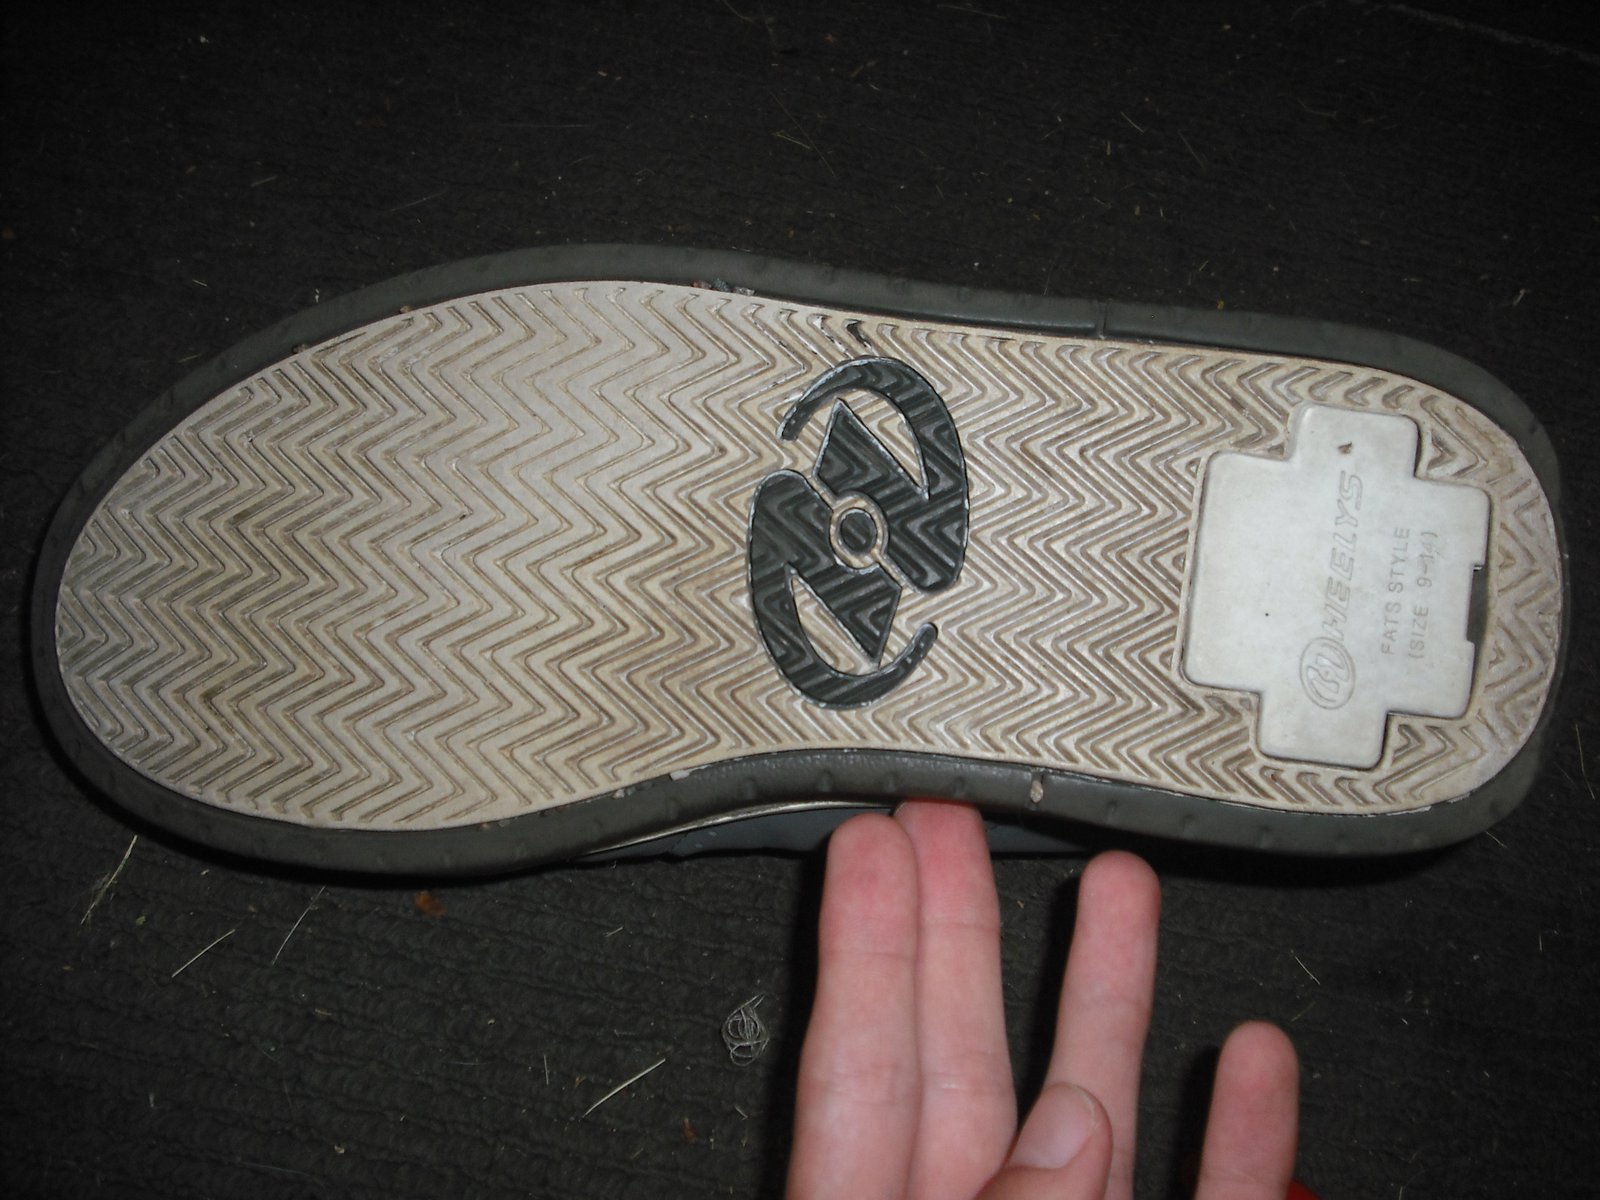 Sole of the shoe